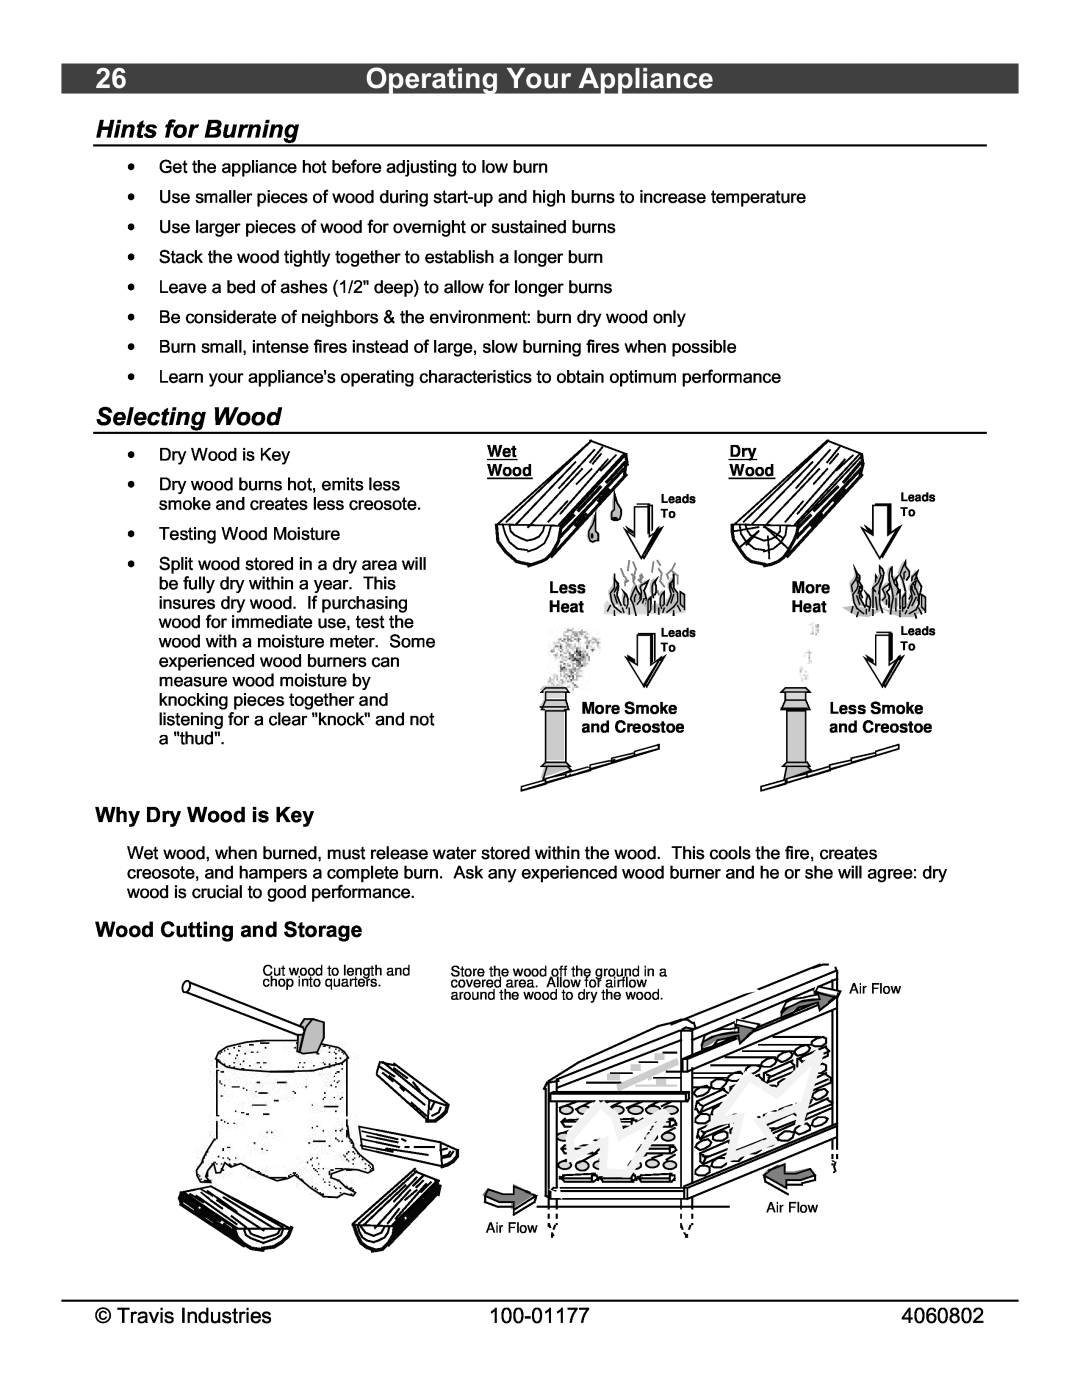 Lopi Leyden Wood Stove owner manual Operating Your Appliance, Hints for Burning, Selecting Wood, Why Dry Wood is Key 